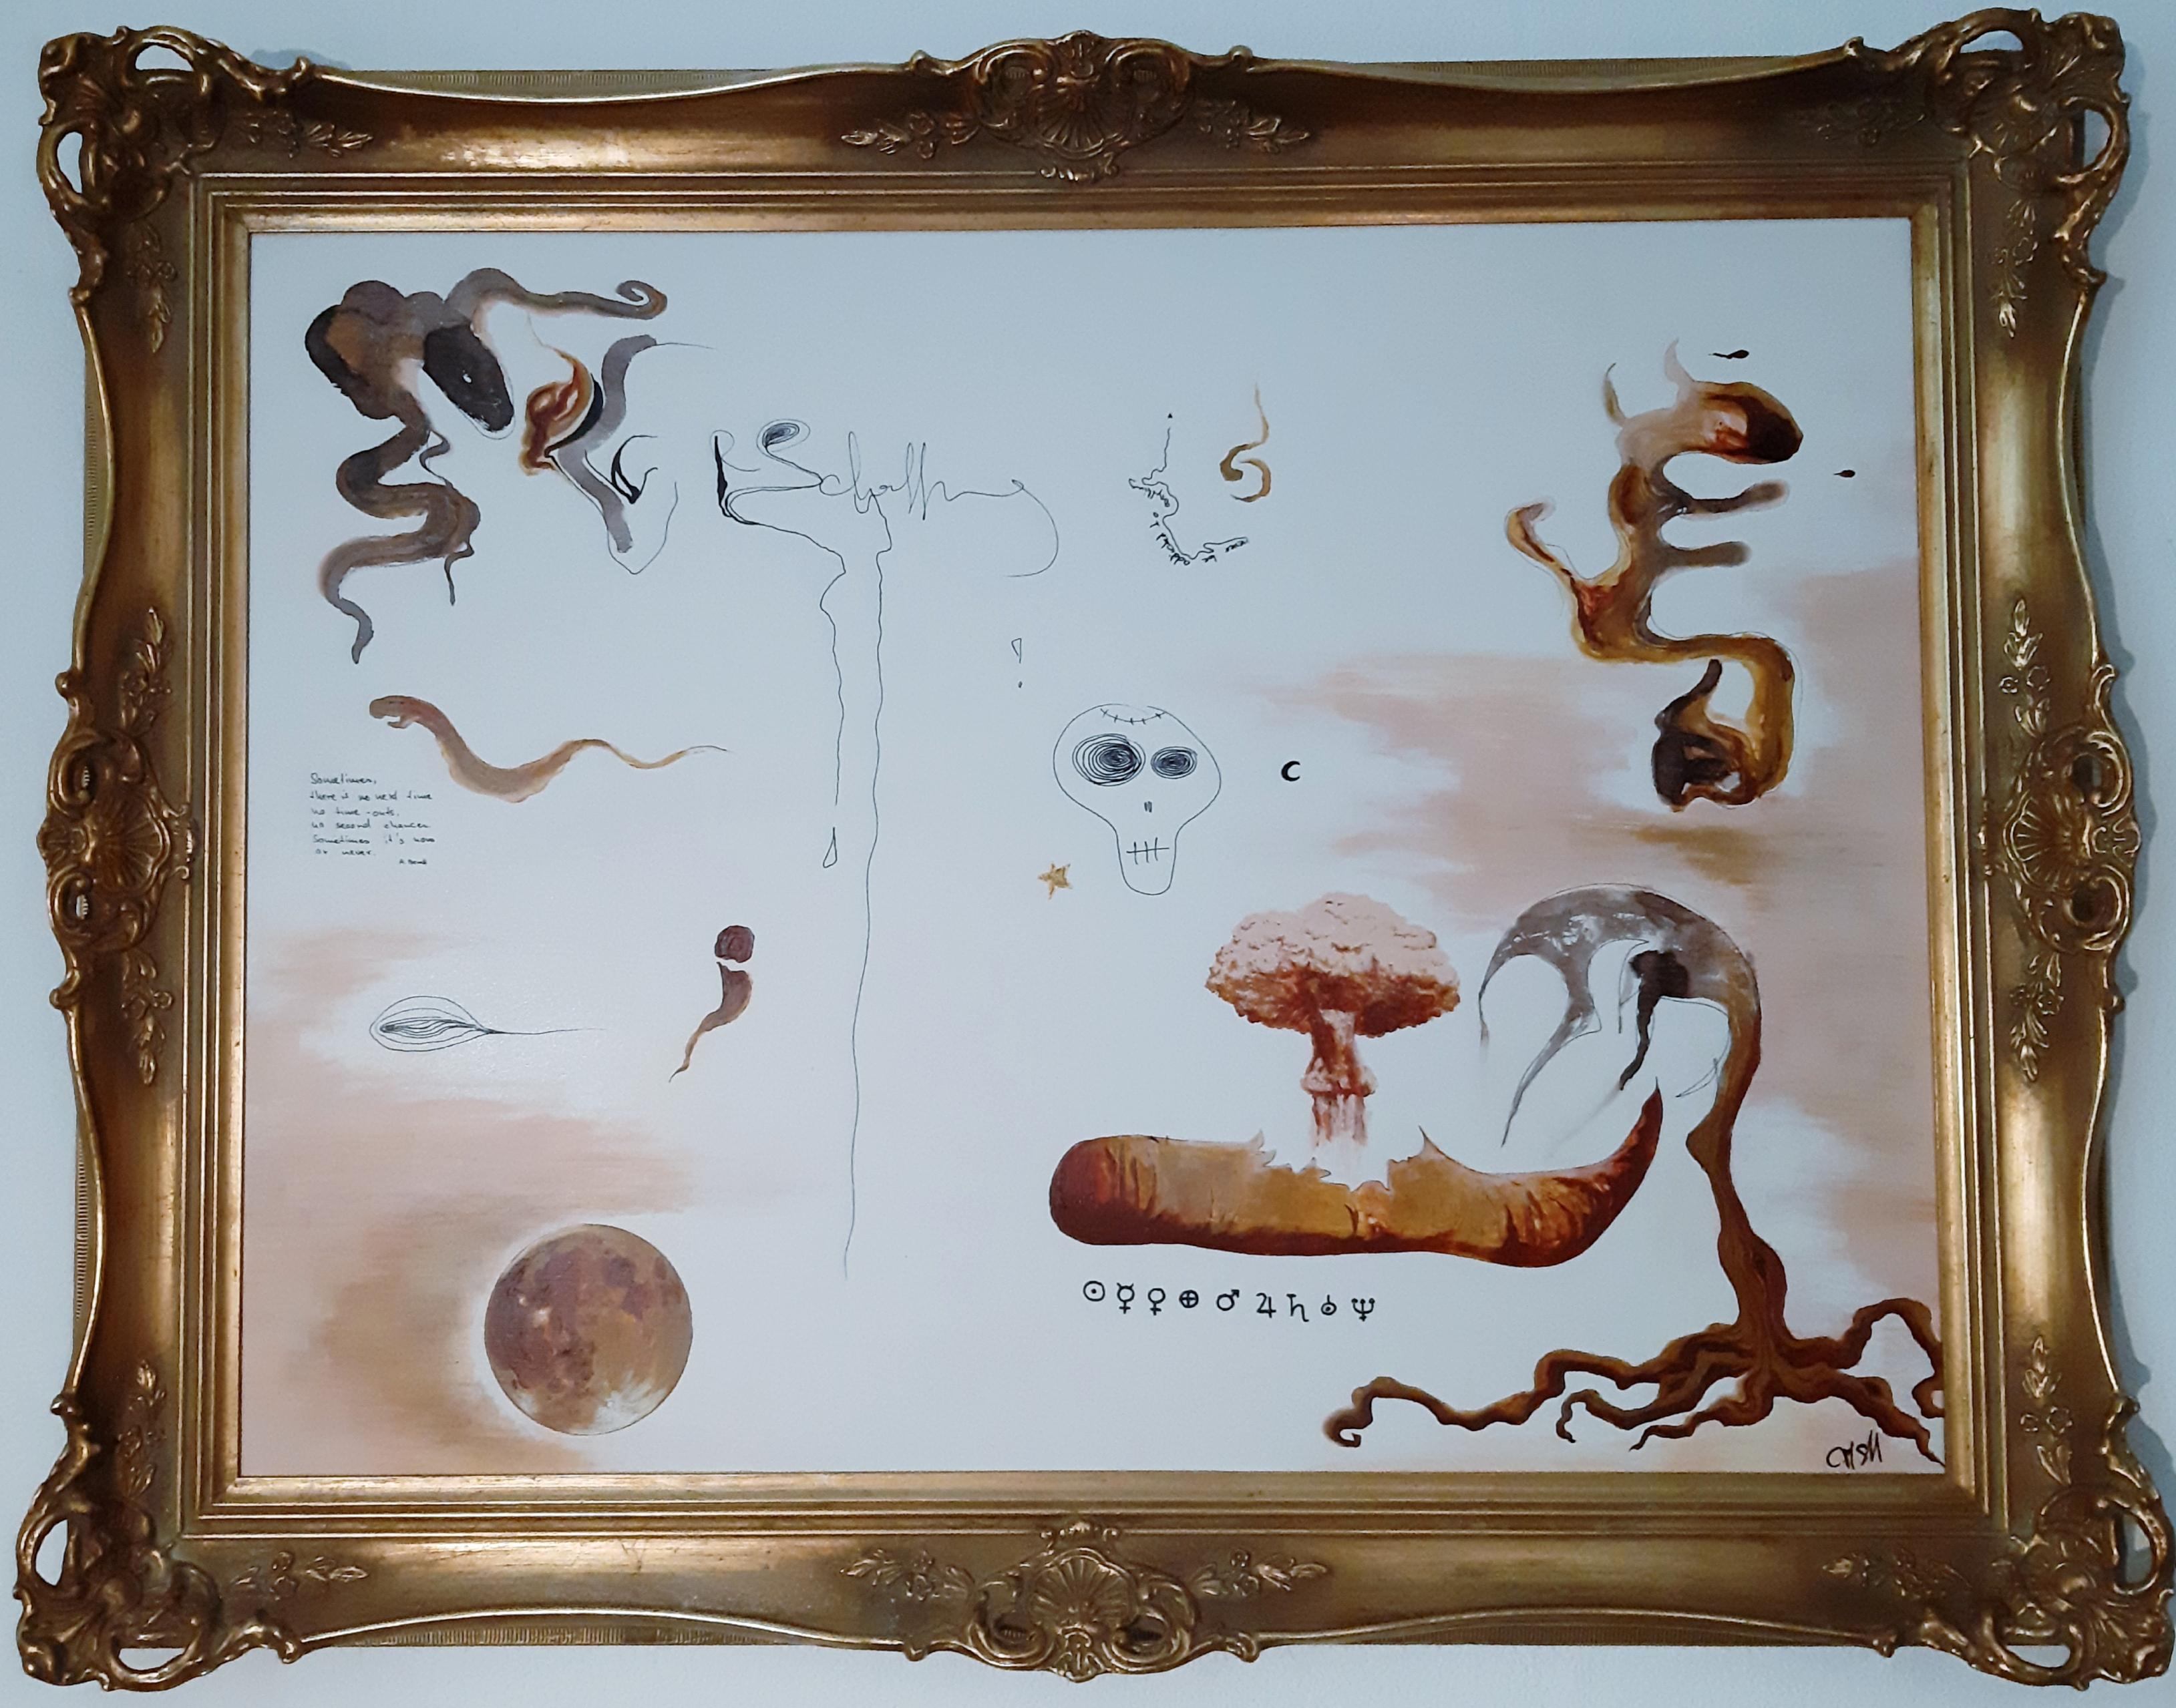 Chroessi Schnell - "Creation and Release".

Surrealism, abstract forms, dream universe.

Moon, carrot, mushroom cloud, skull, snakes, ghosts - Symbols that stand for demonlike feelings and selfmade problems, insomnia and rebirth through simple